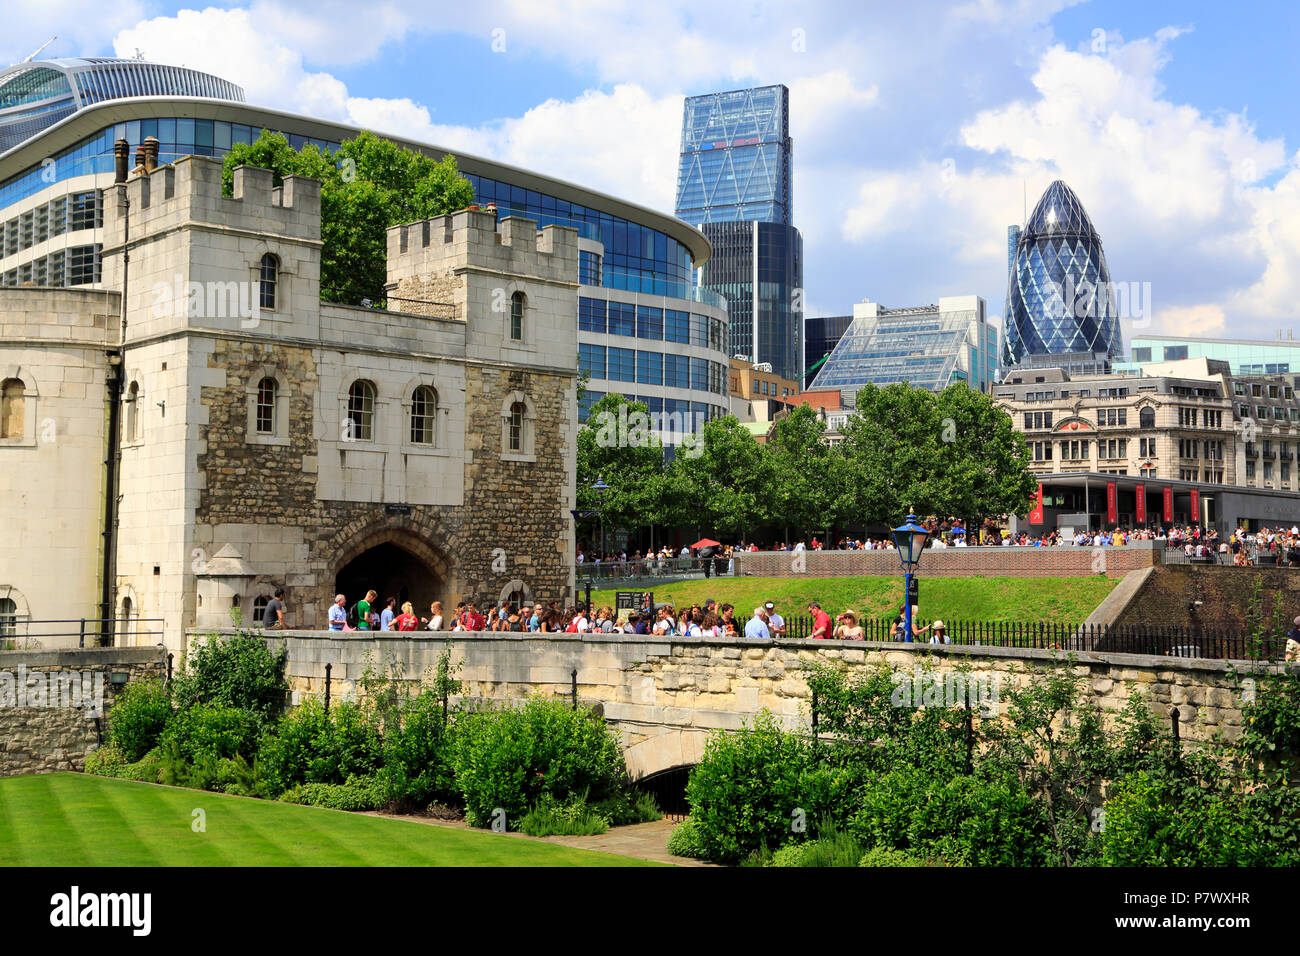 The Tower Of London, London, England, Europe Stock Photo